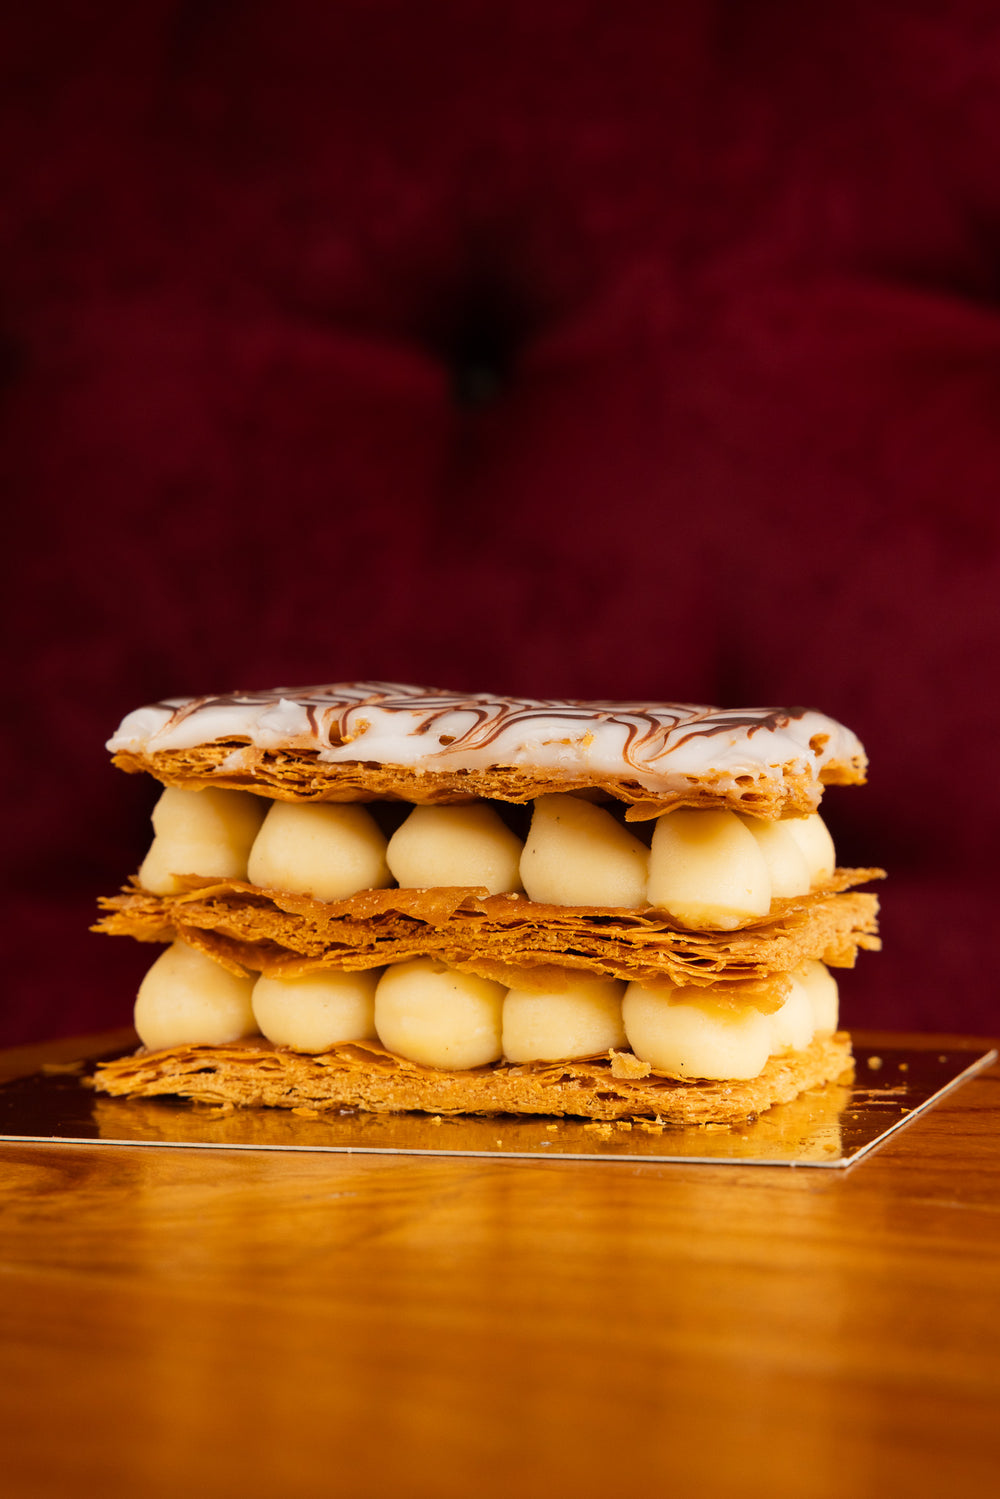 Millefeuille